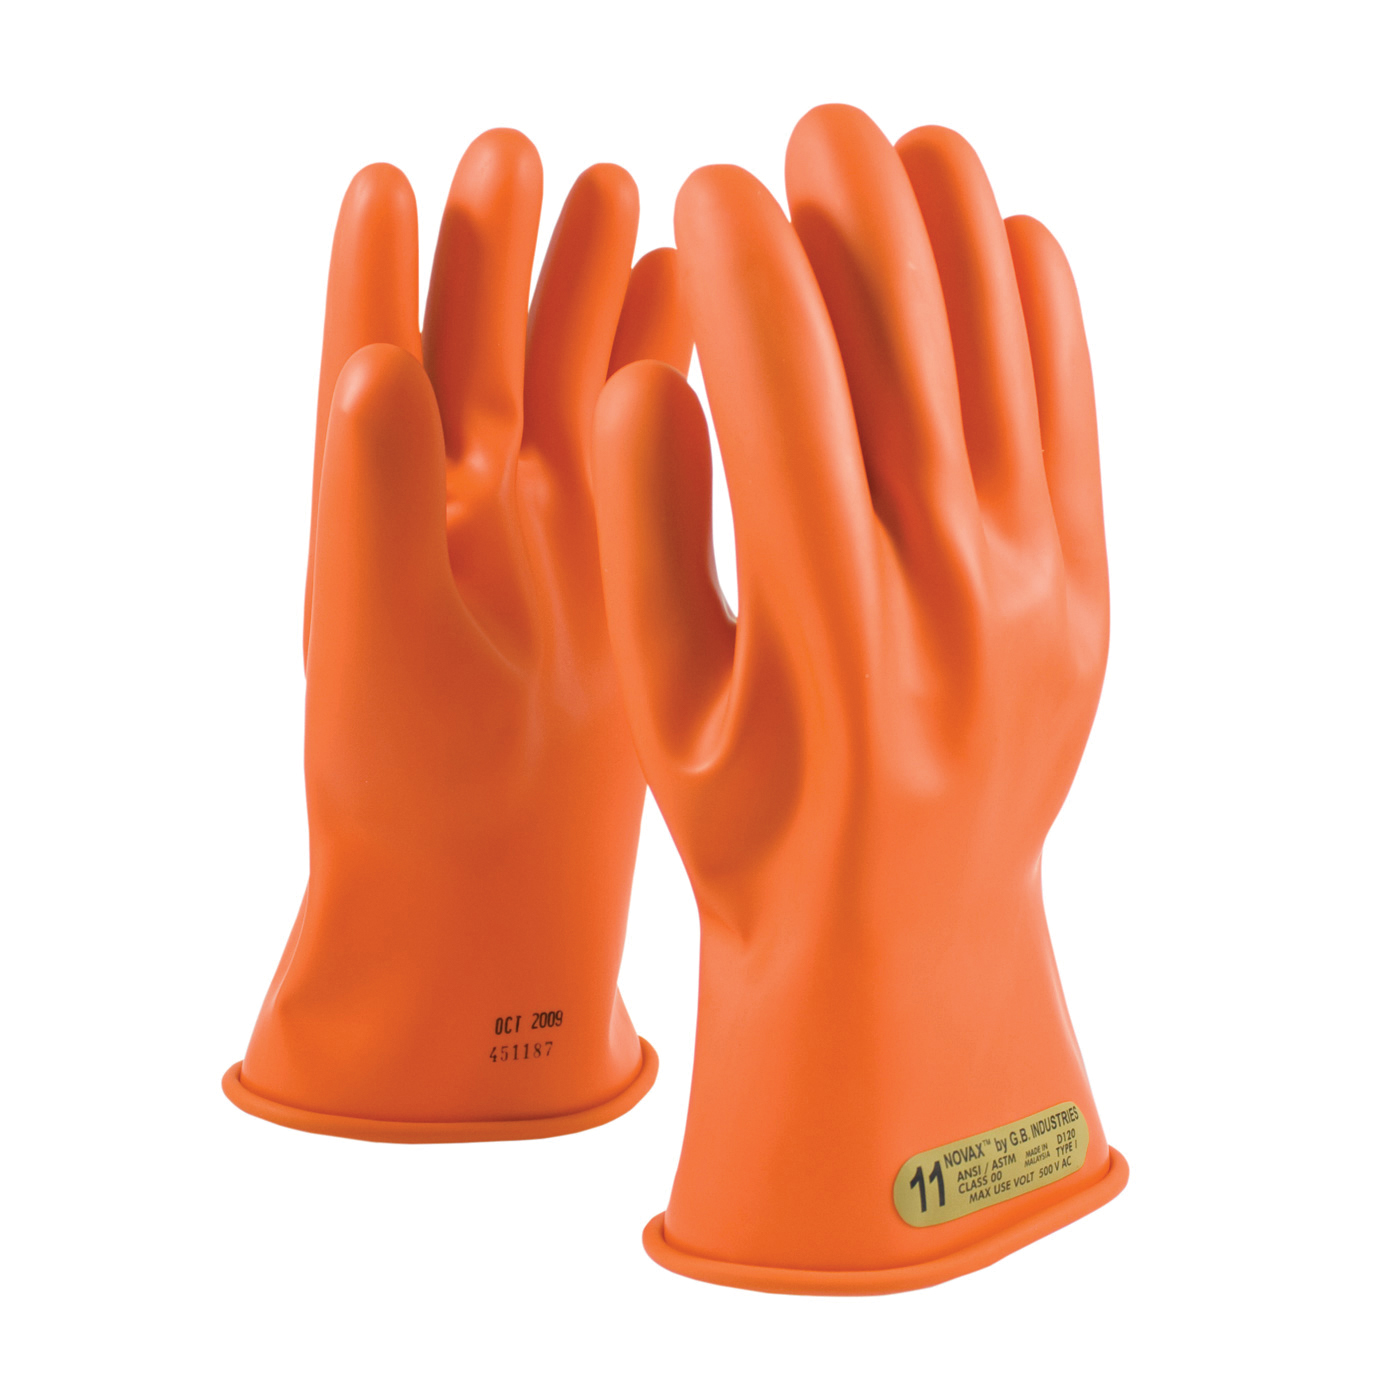 Novax® 147-00-11/10 Insulating Unisex Electrical Safety Gloves, SZ 10, Natural Rubber, Orange, 11 in L, ASTM Class: Class 00, 500 VAC/750 VDC Max Use Voltage